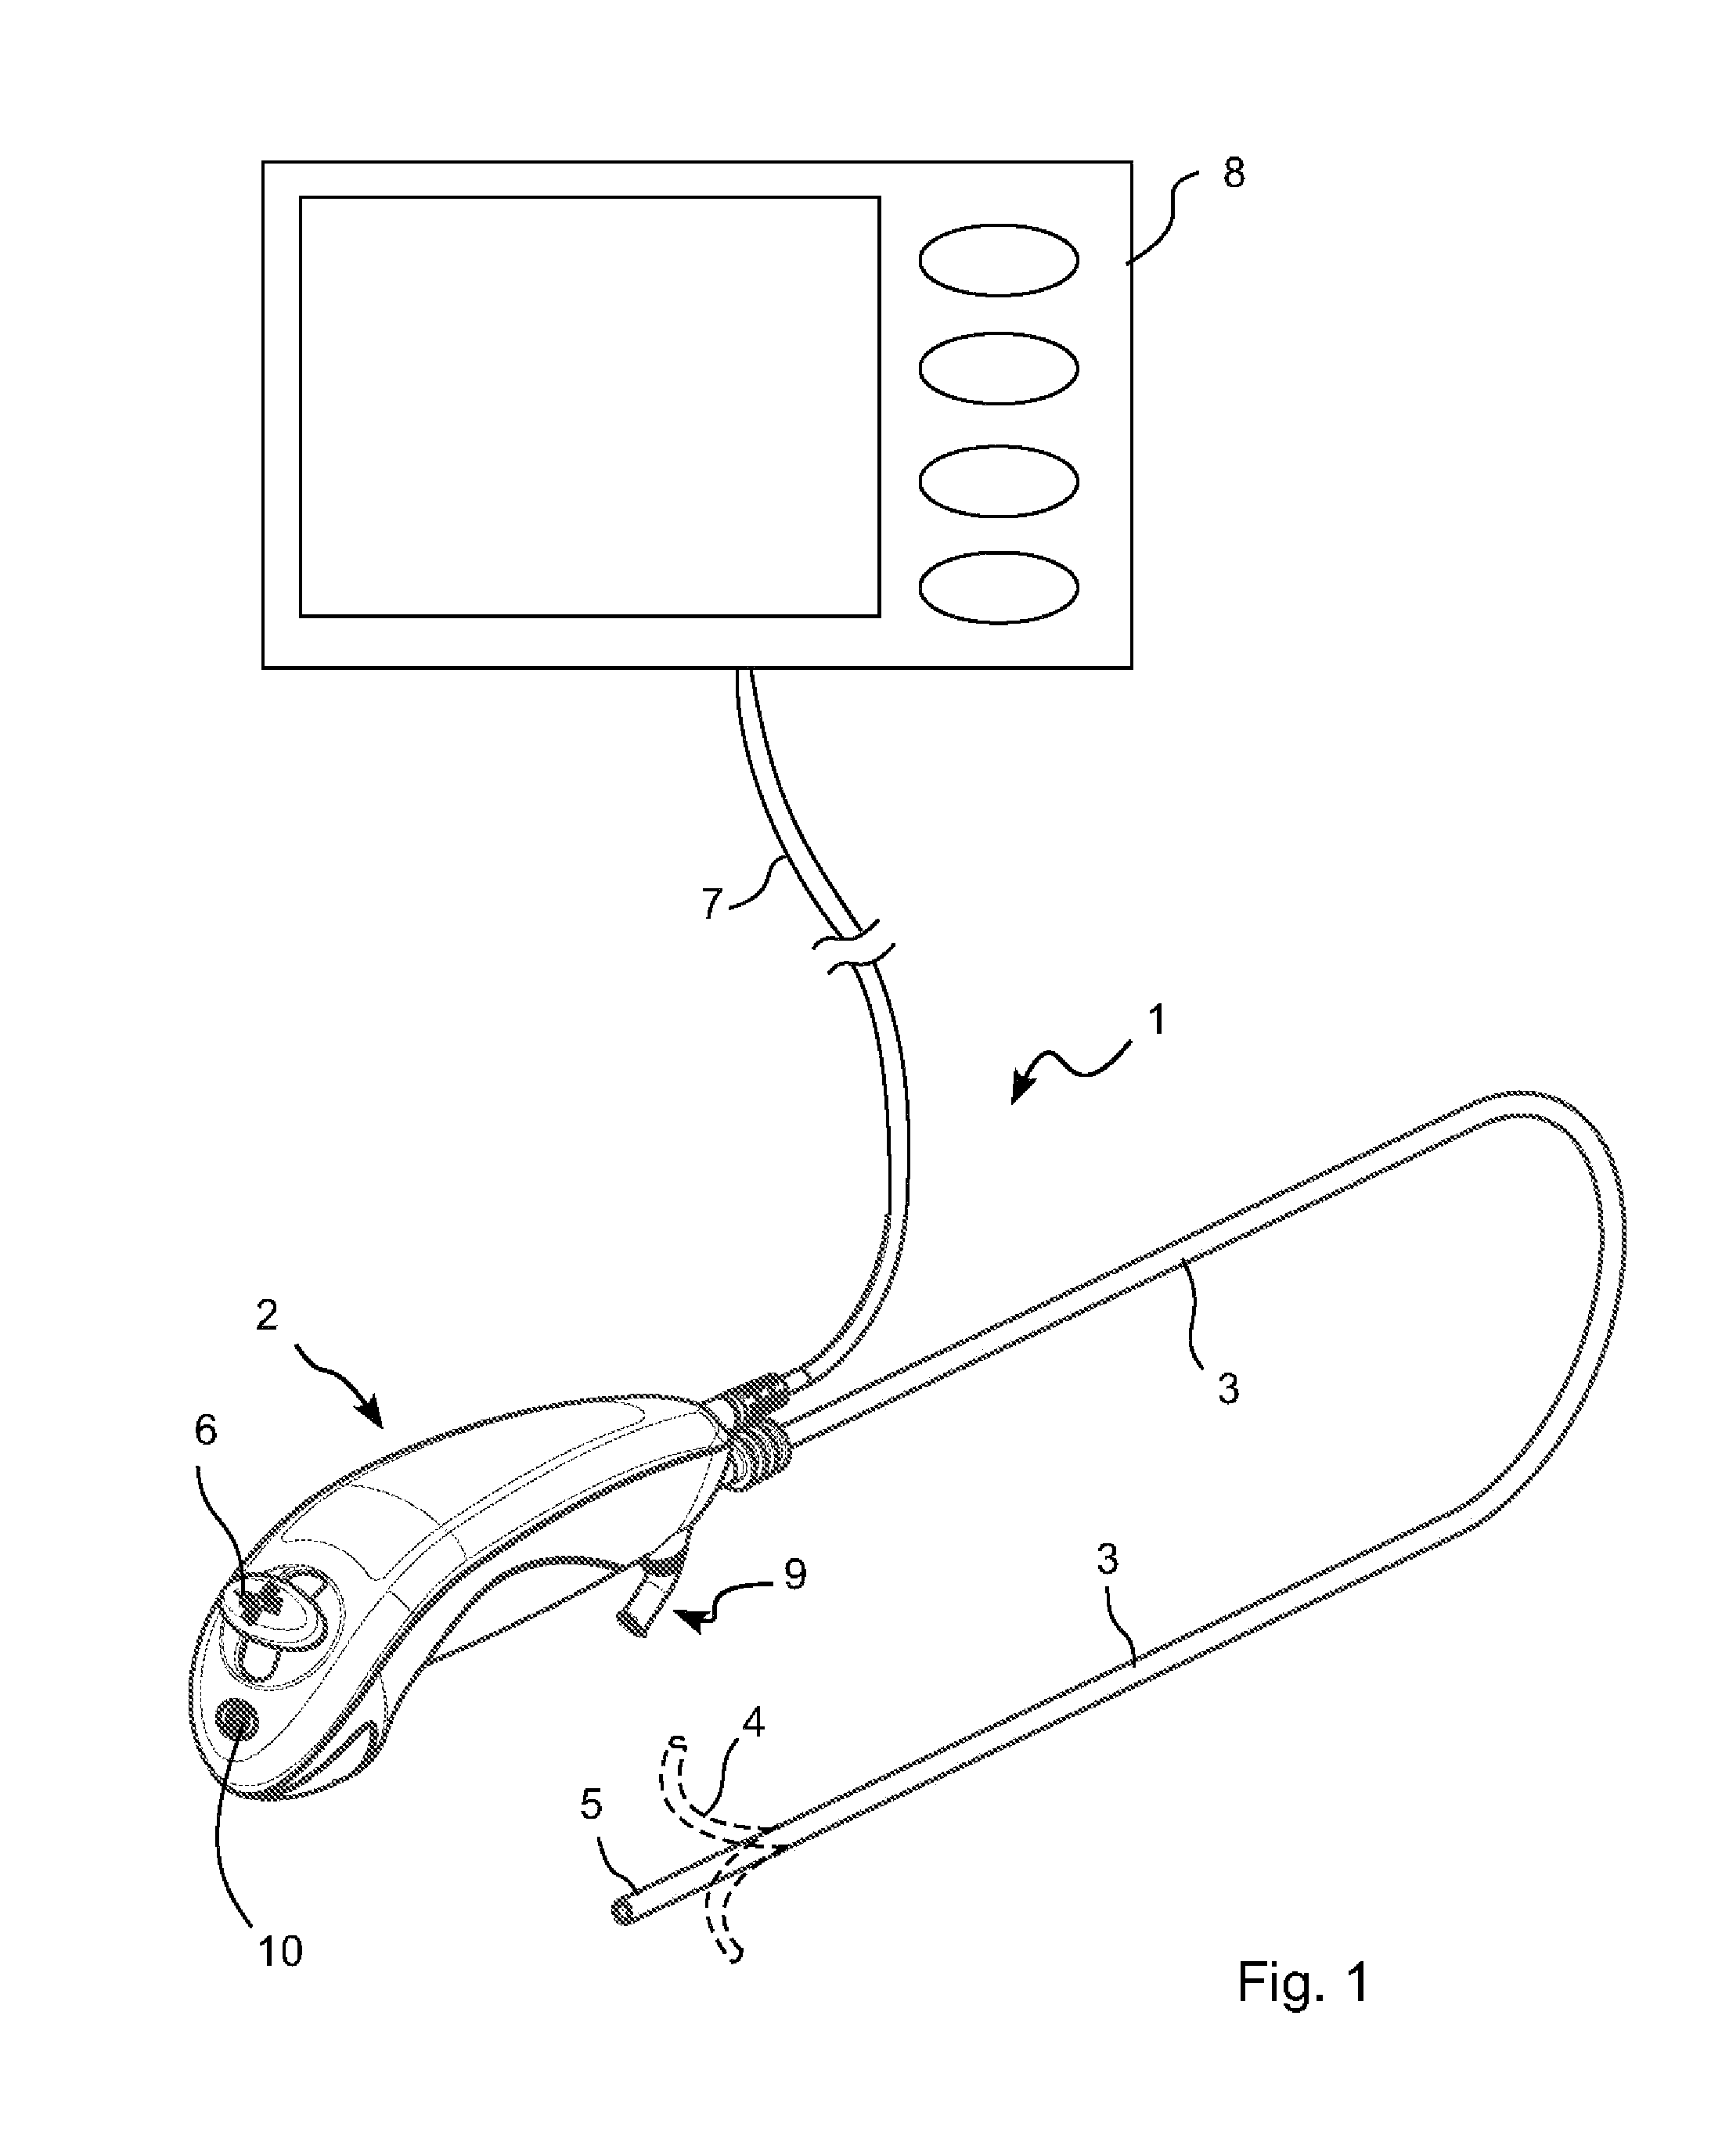 Imaging system with disposable part